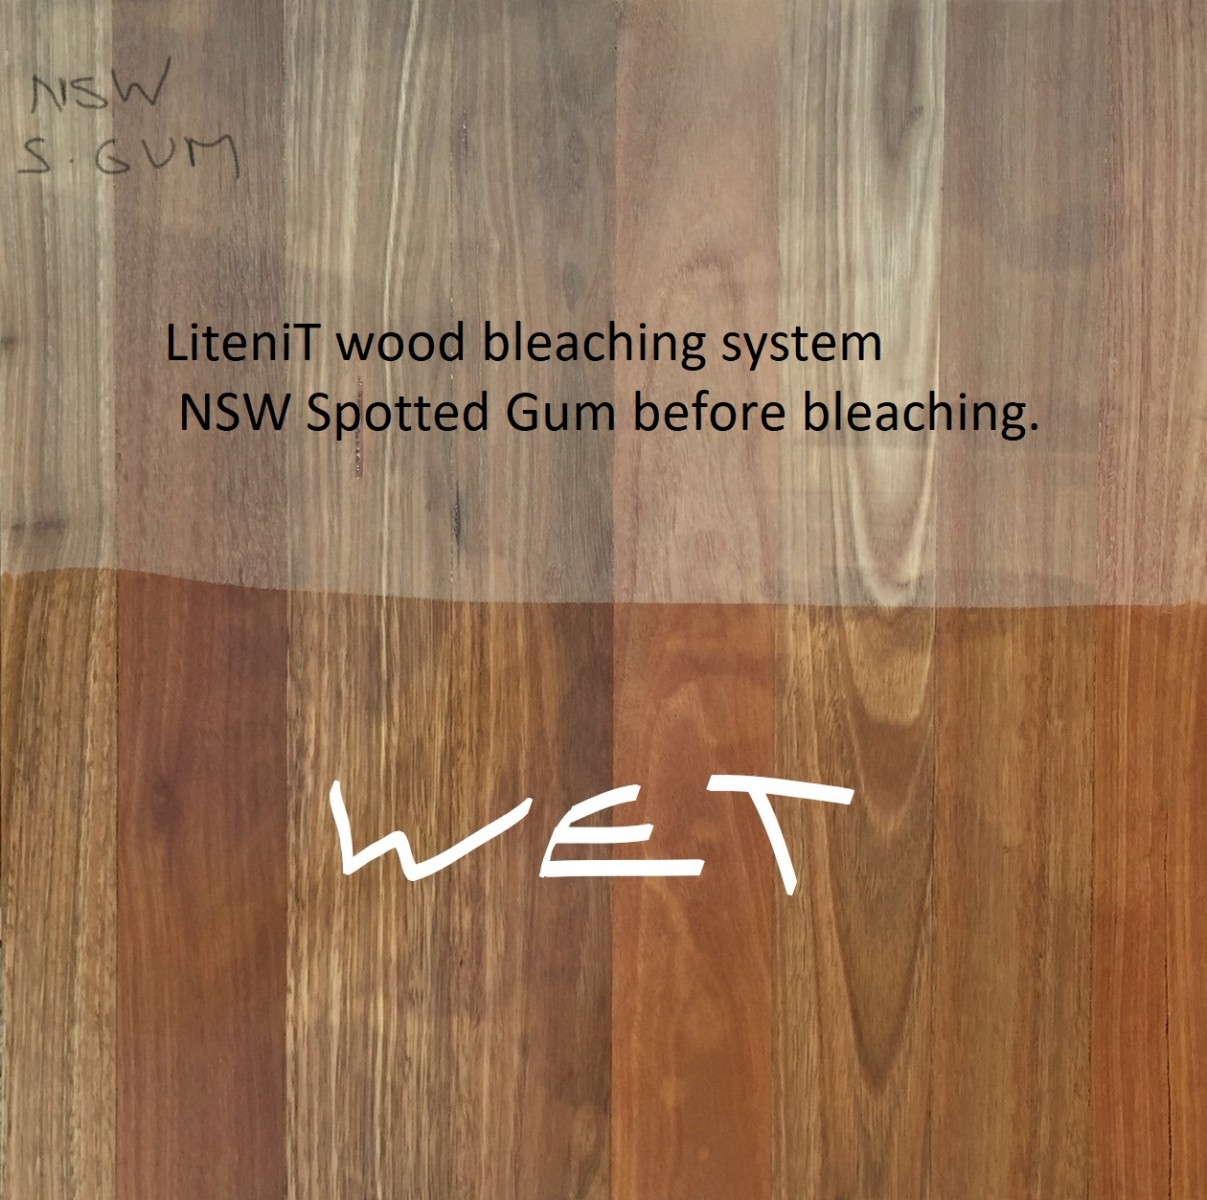 Bleached NSW Spotted Gum before bleaching